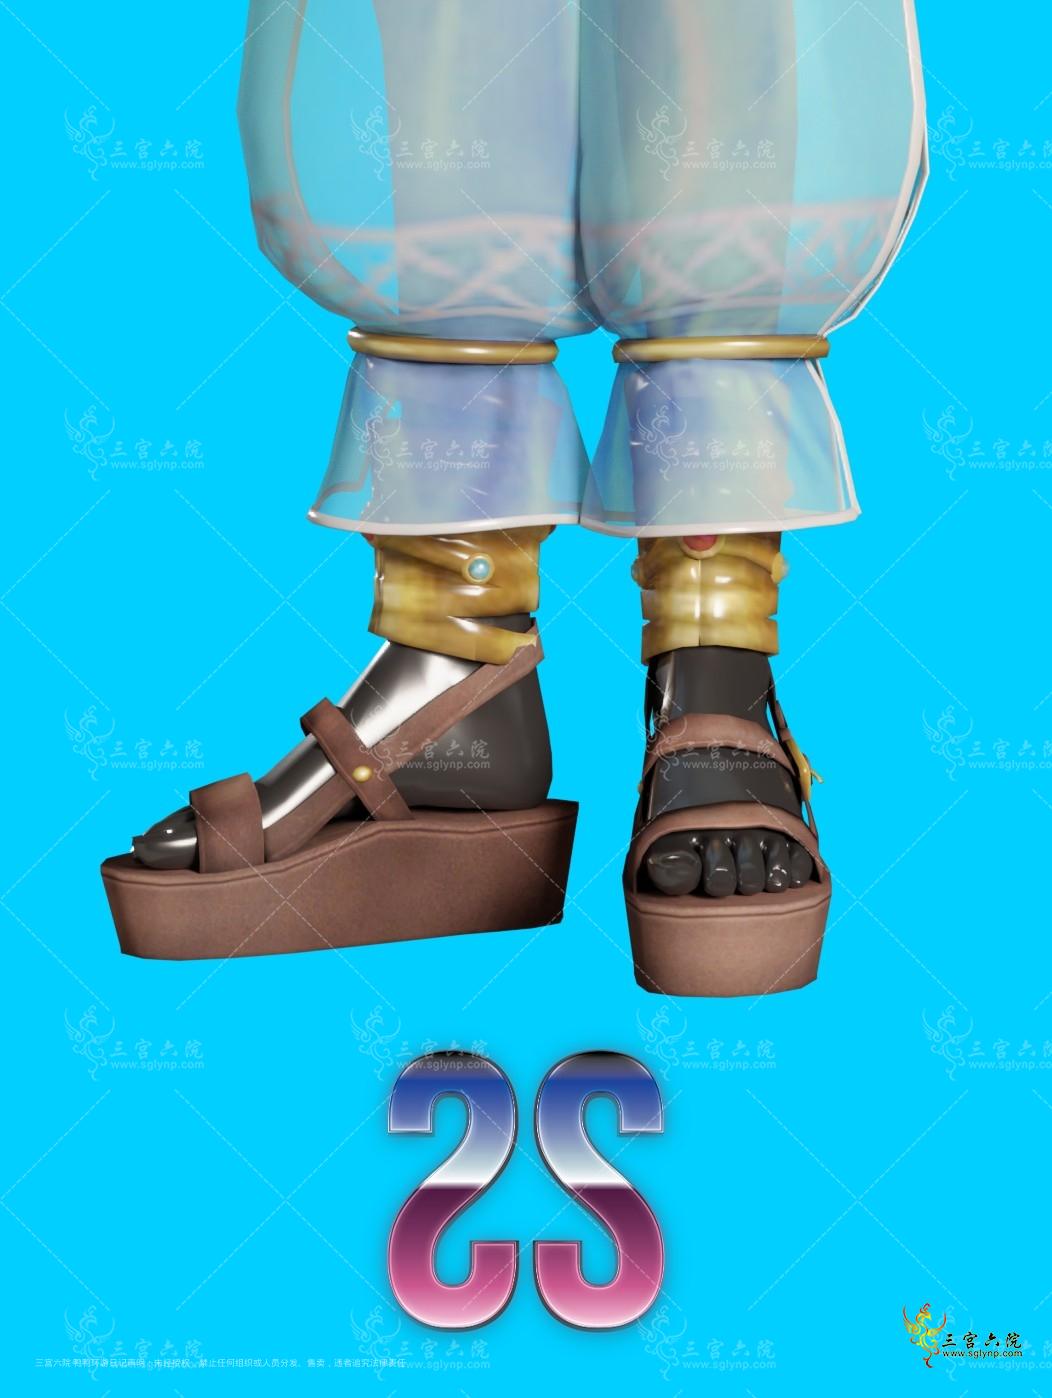 Desing Award Shoes preview.png